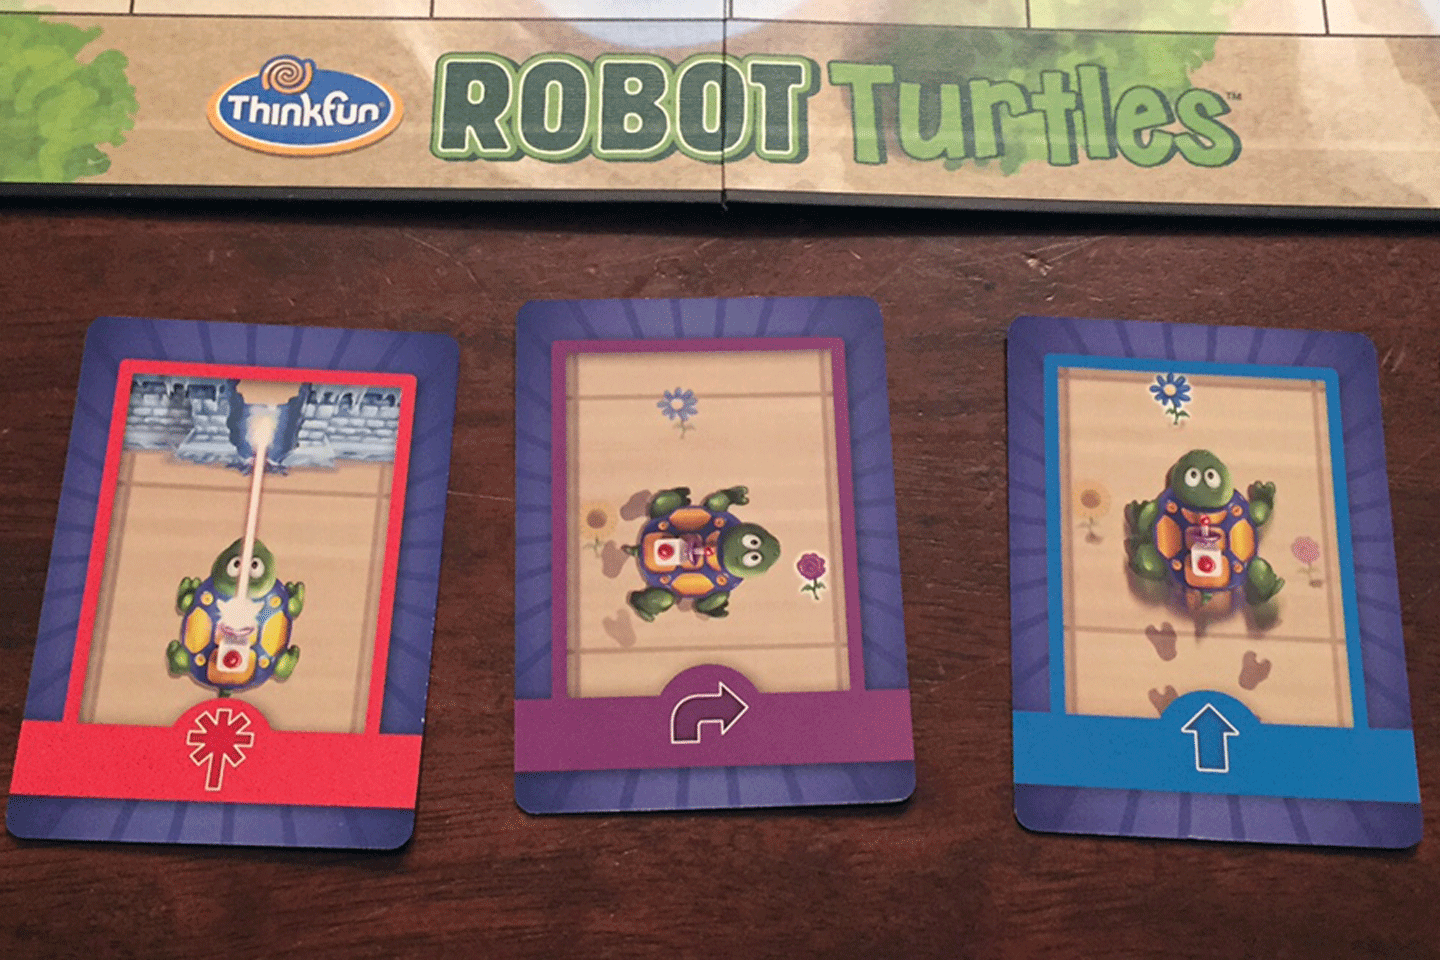 Cards program "Robot Turtles" to blast, turn or proceed to their destination. (Courtesy of Matthew Farber) 